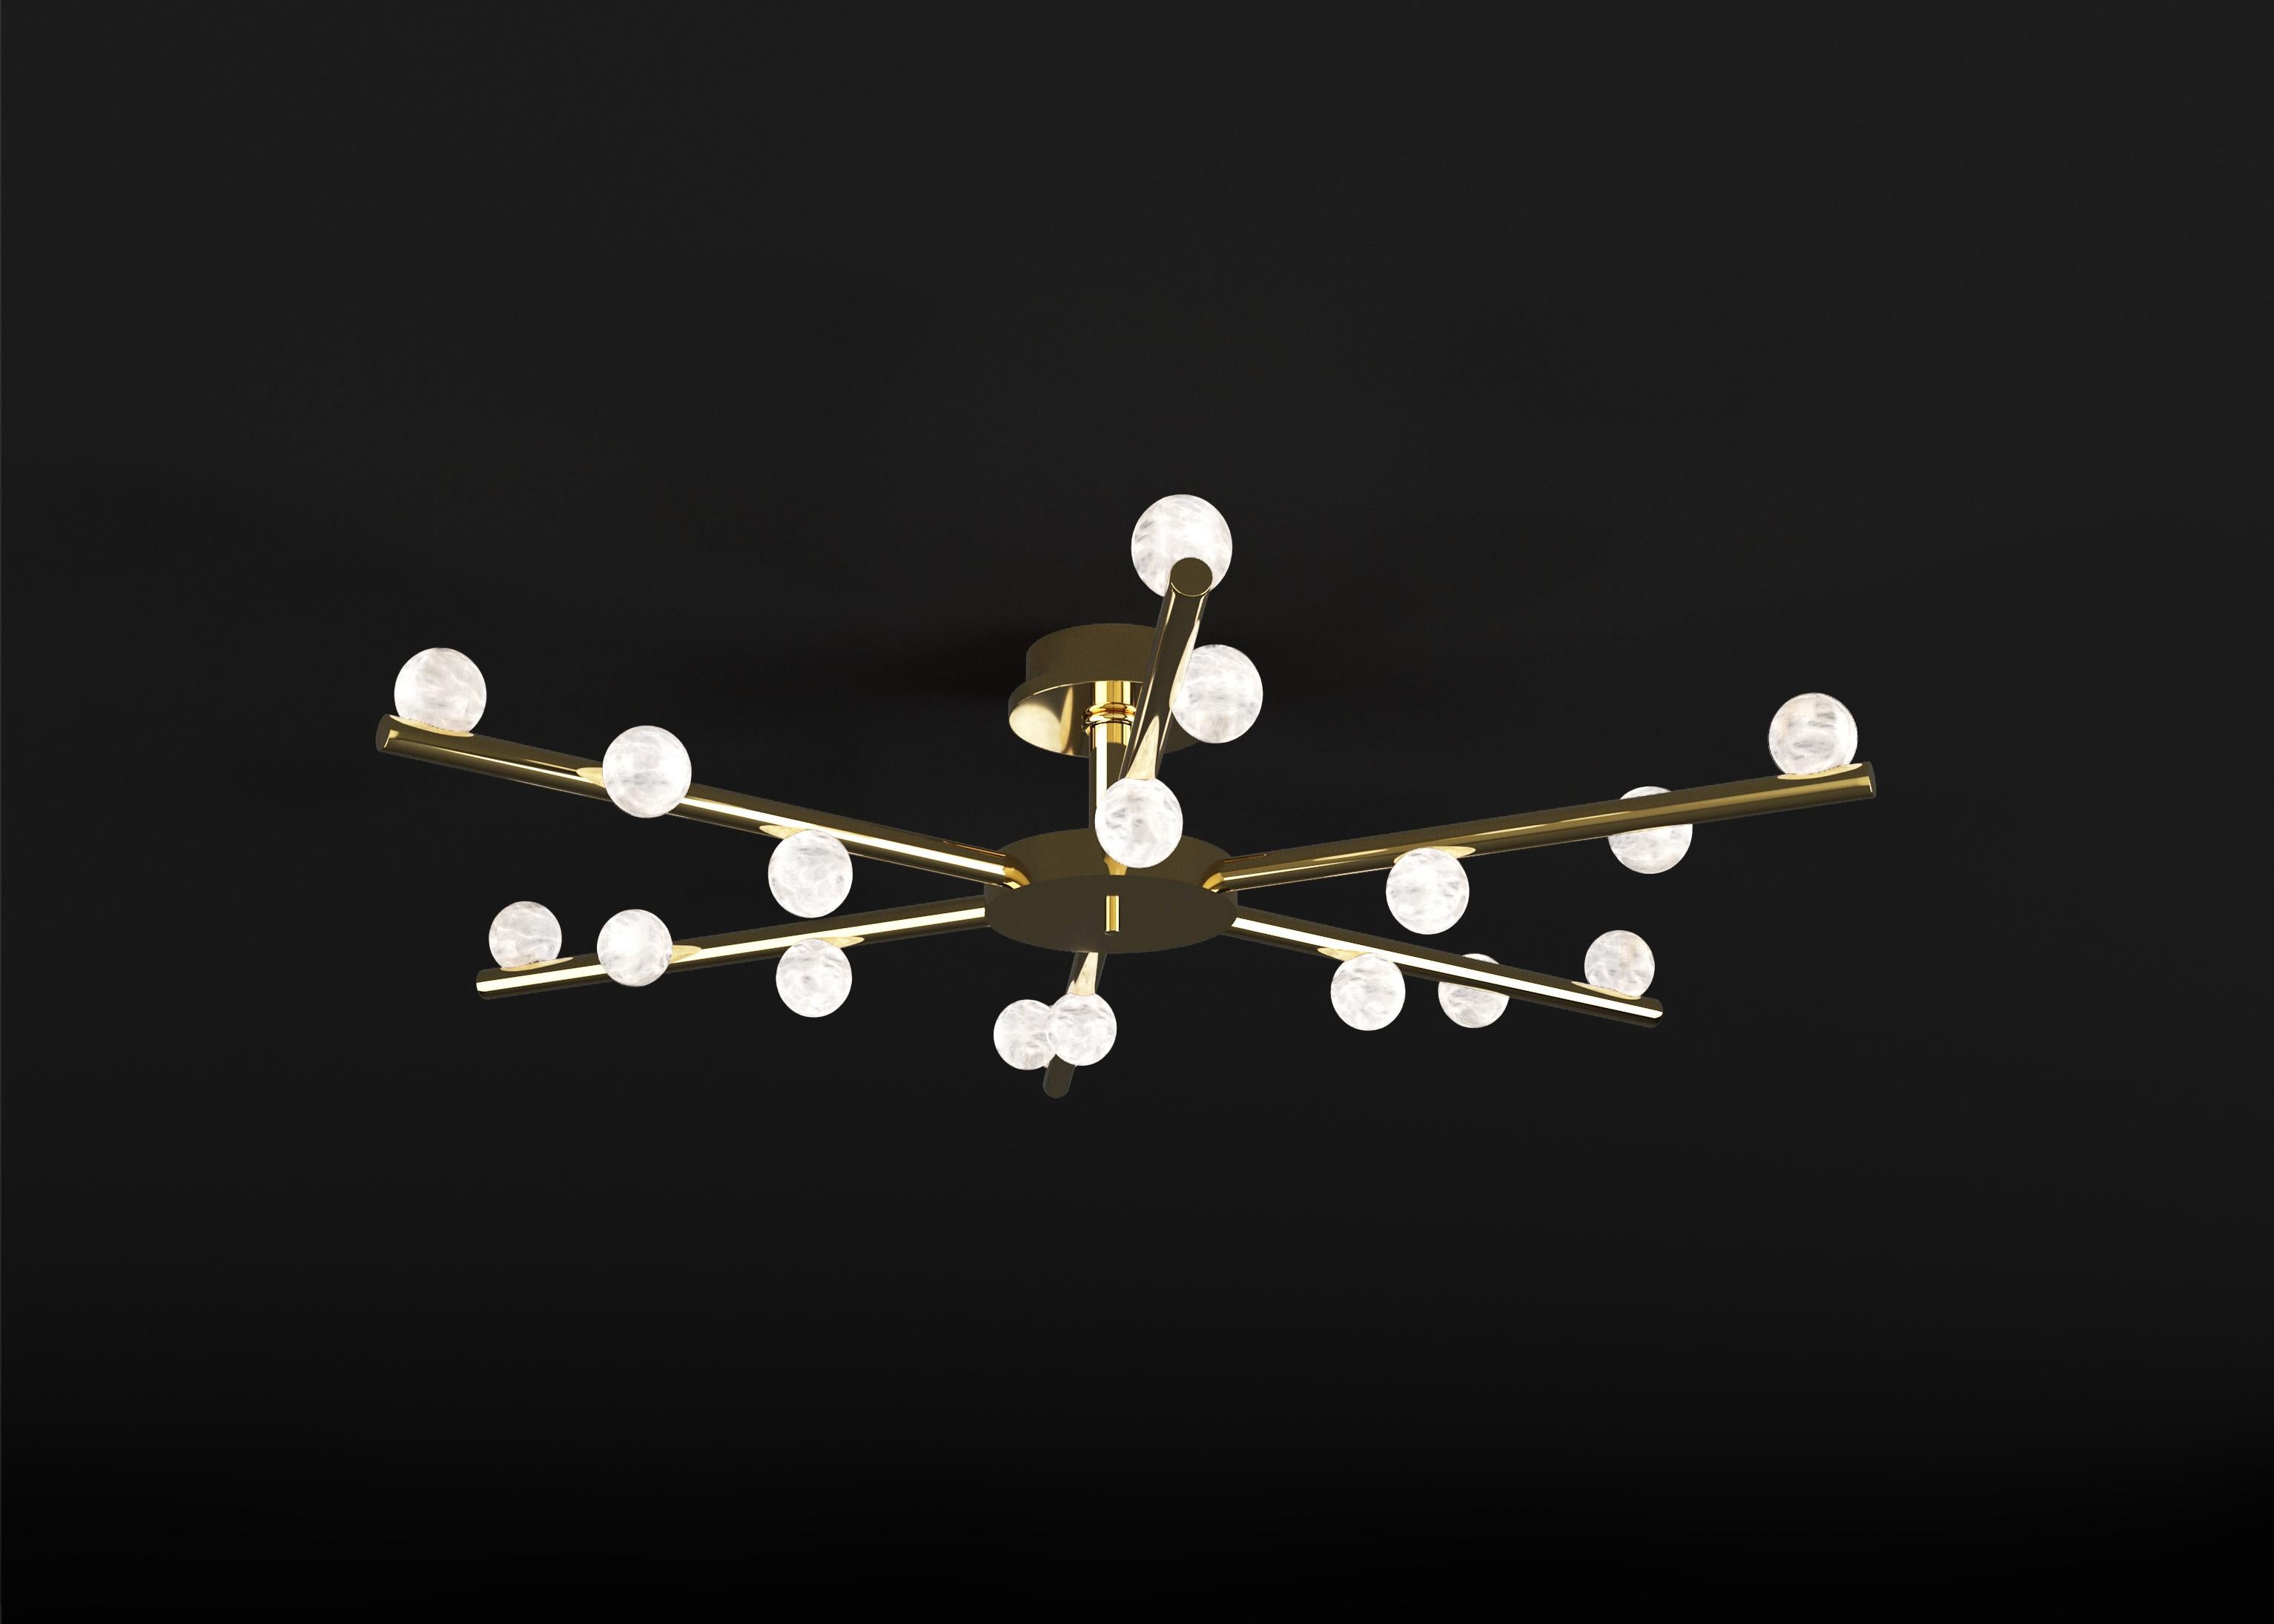 Demetra Shiny Gold Metal Ceiling Lamp by Alabastro Italiano
Dimensions: D 85 x W 97 x H 22 cm.
Materials: White alabaster and shiny gold metal.

Available in different finishes: Shiny Silver, Bronze, Brushed Brass, Ruggine of Florence, Brushed